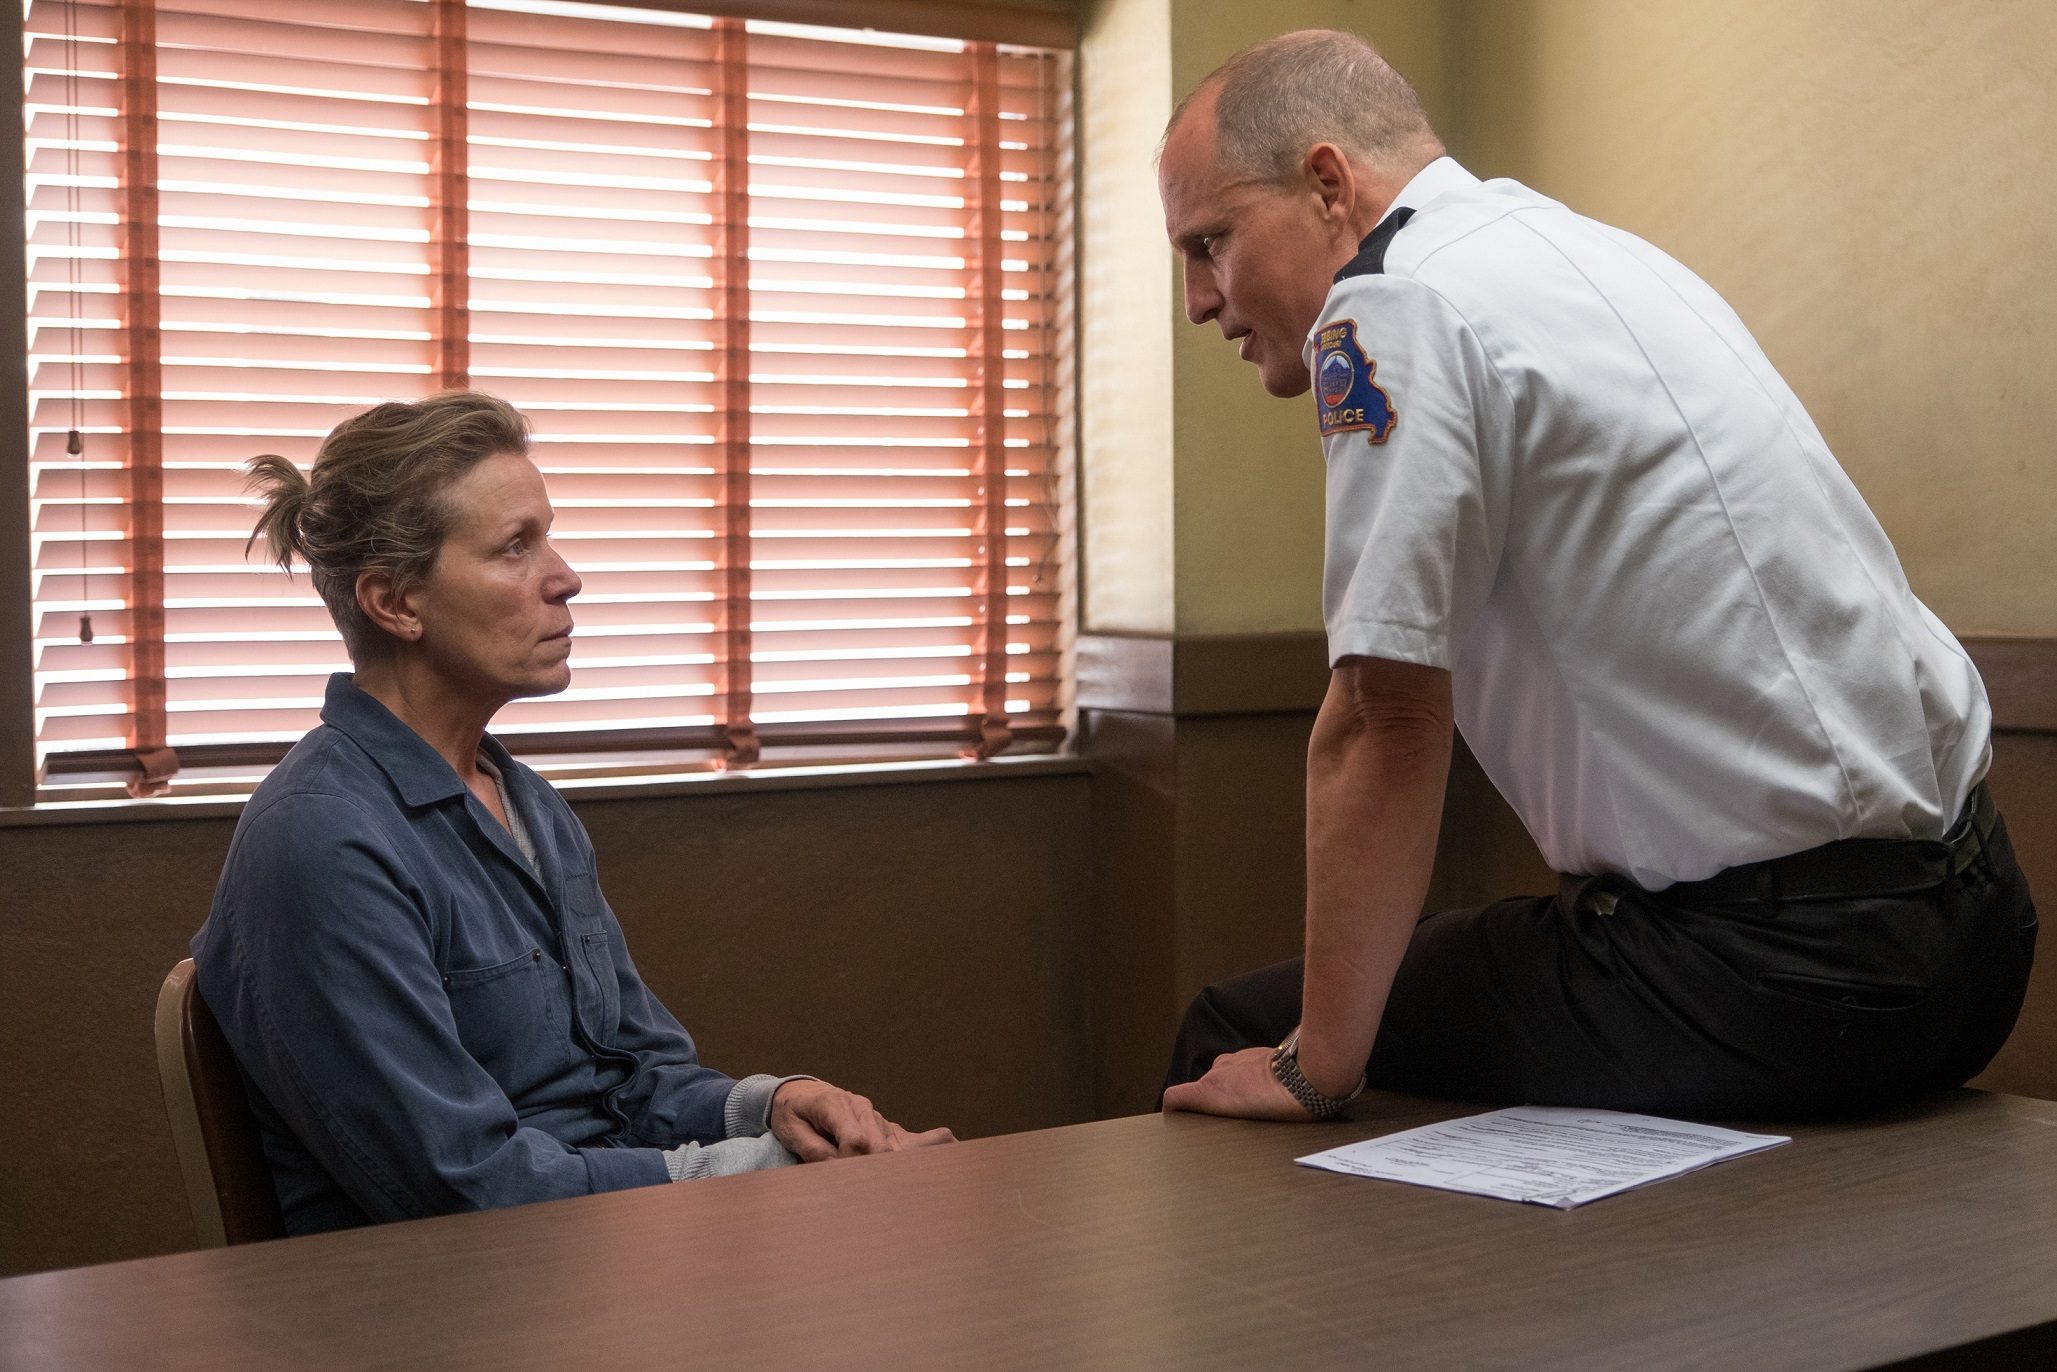 ONE-ON-ONE TALK. Frances McDormand and Woody Harrelson in a confrontation scene for 'Three Billboards Outside Ebbing, Missouri.' 